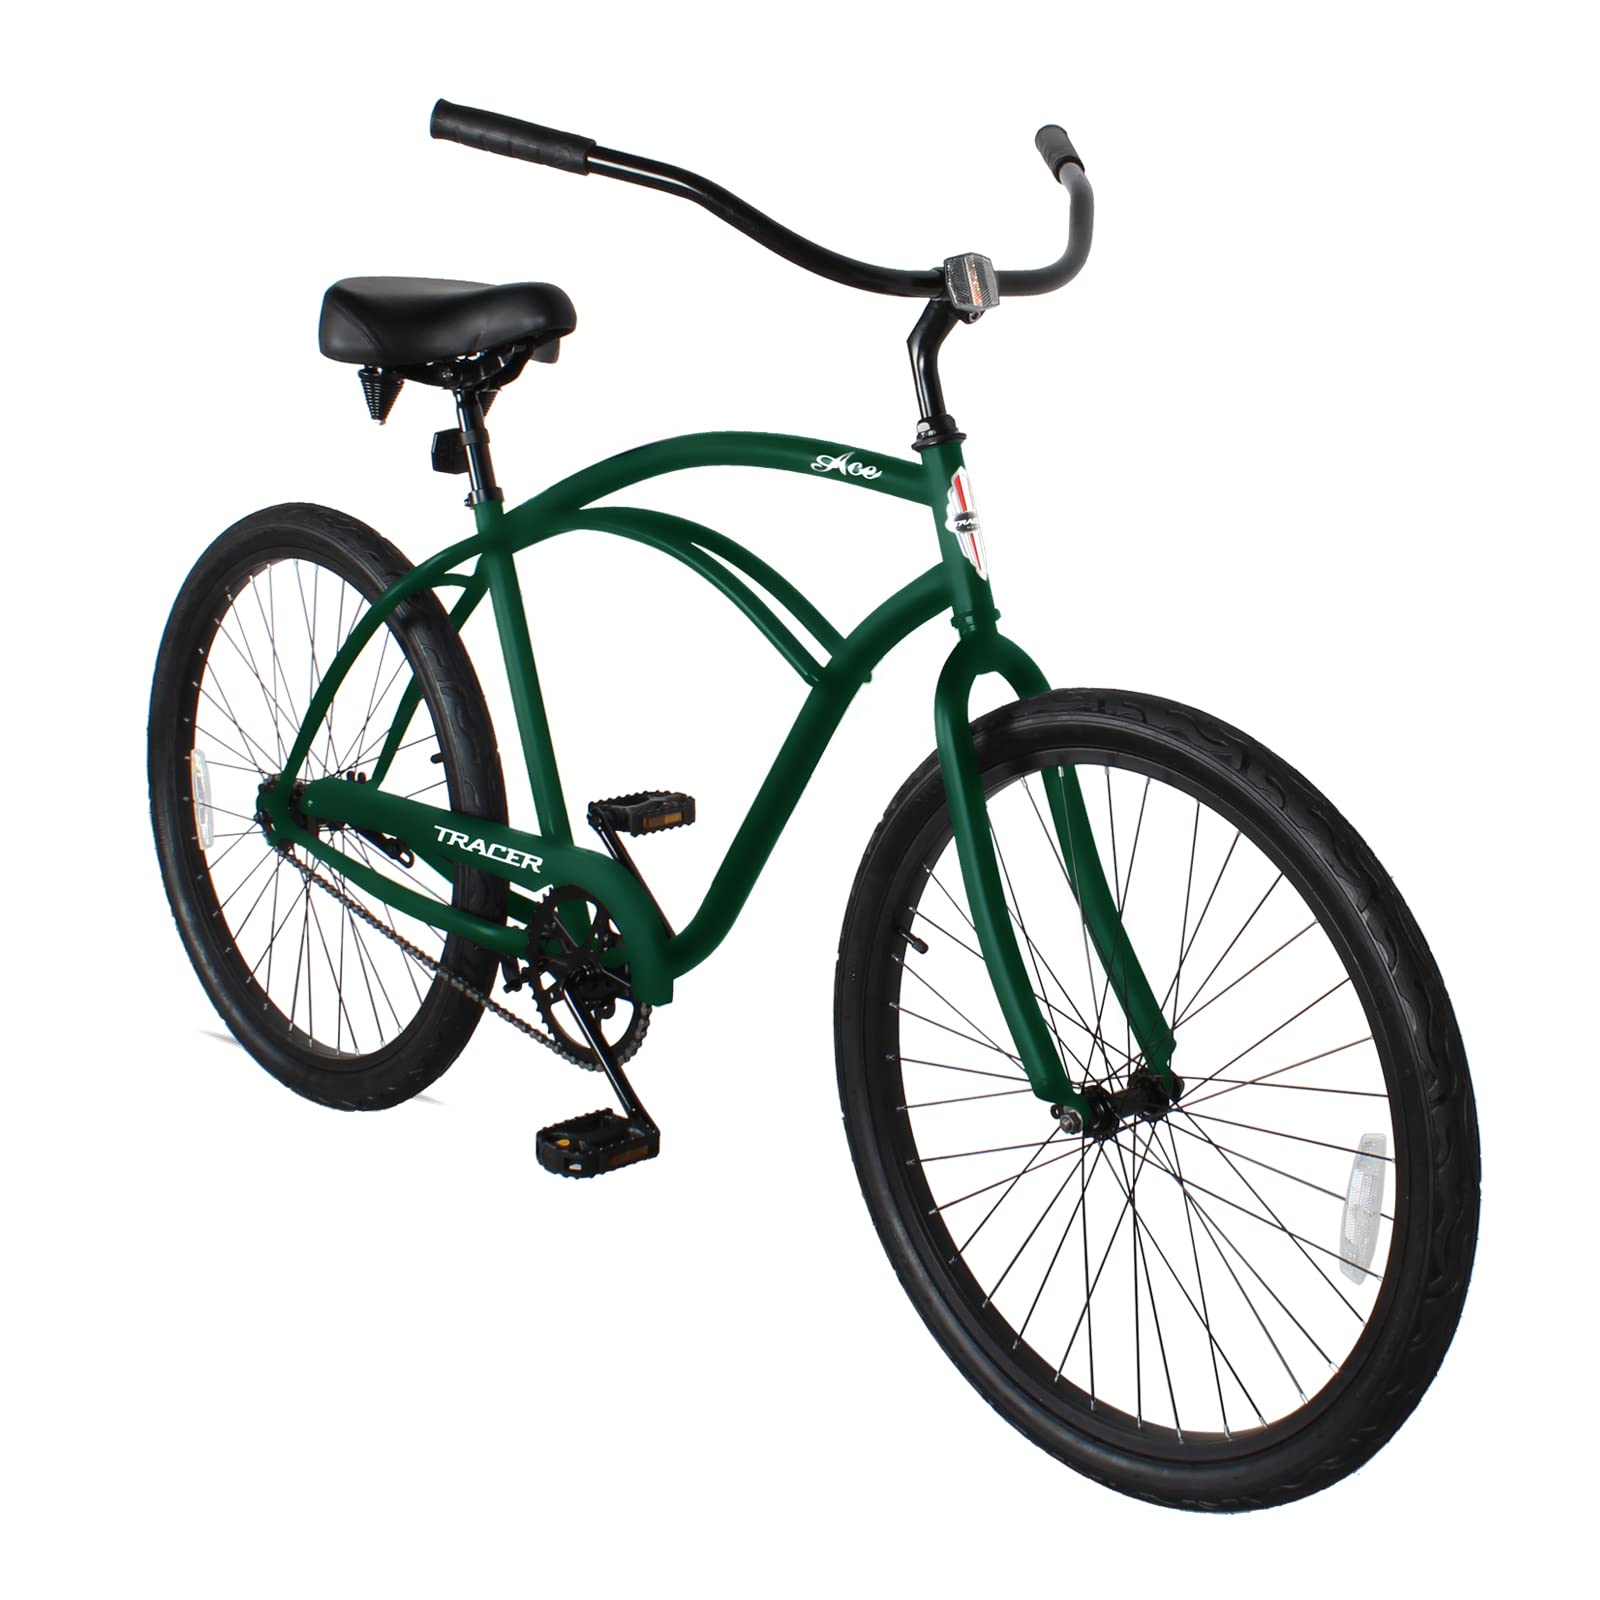 Tracer ACE 26 Inch Beach Cruiser Bike Coaster Brake Single Speed for Adults Multiple Colors Matte Army Green Male